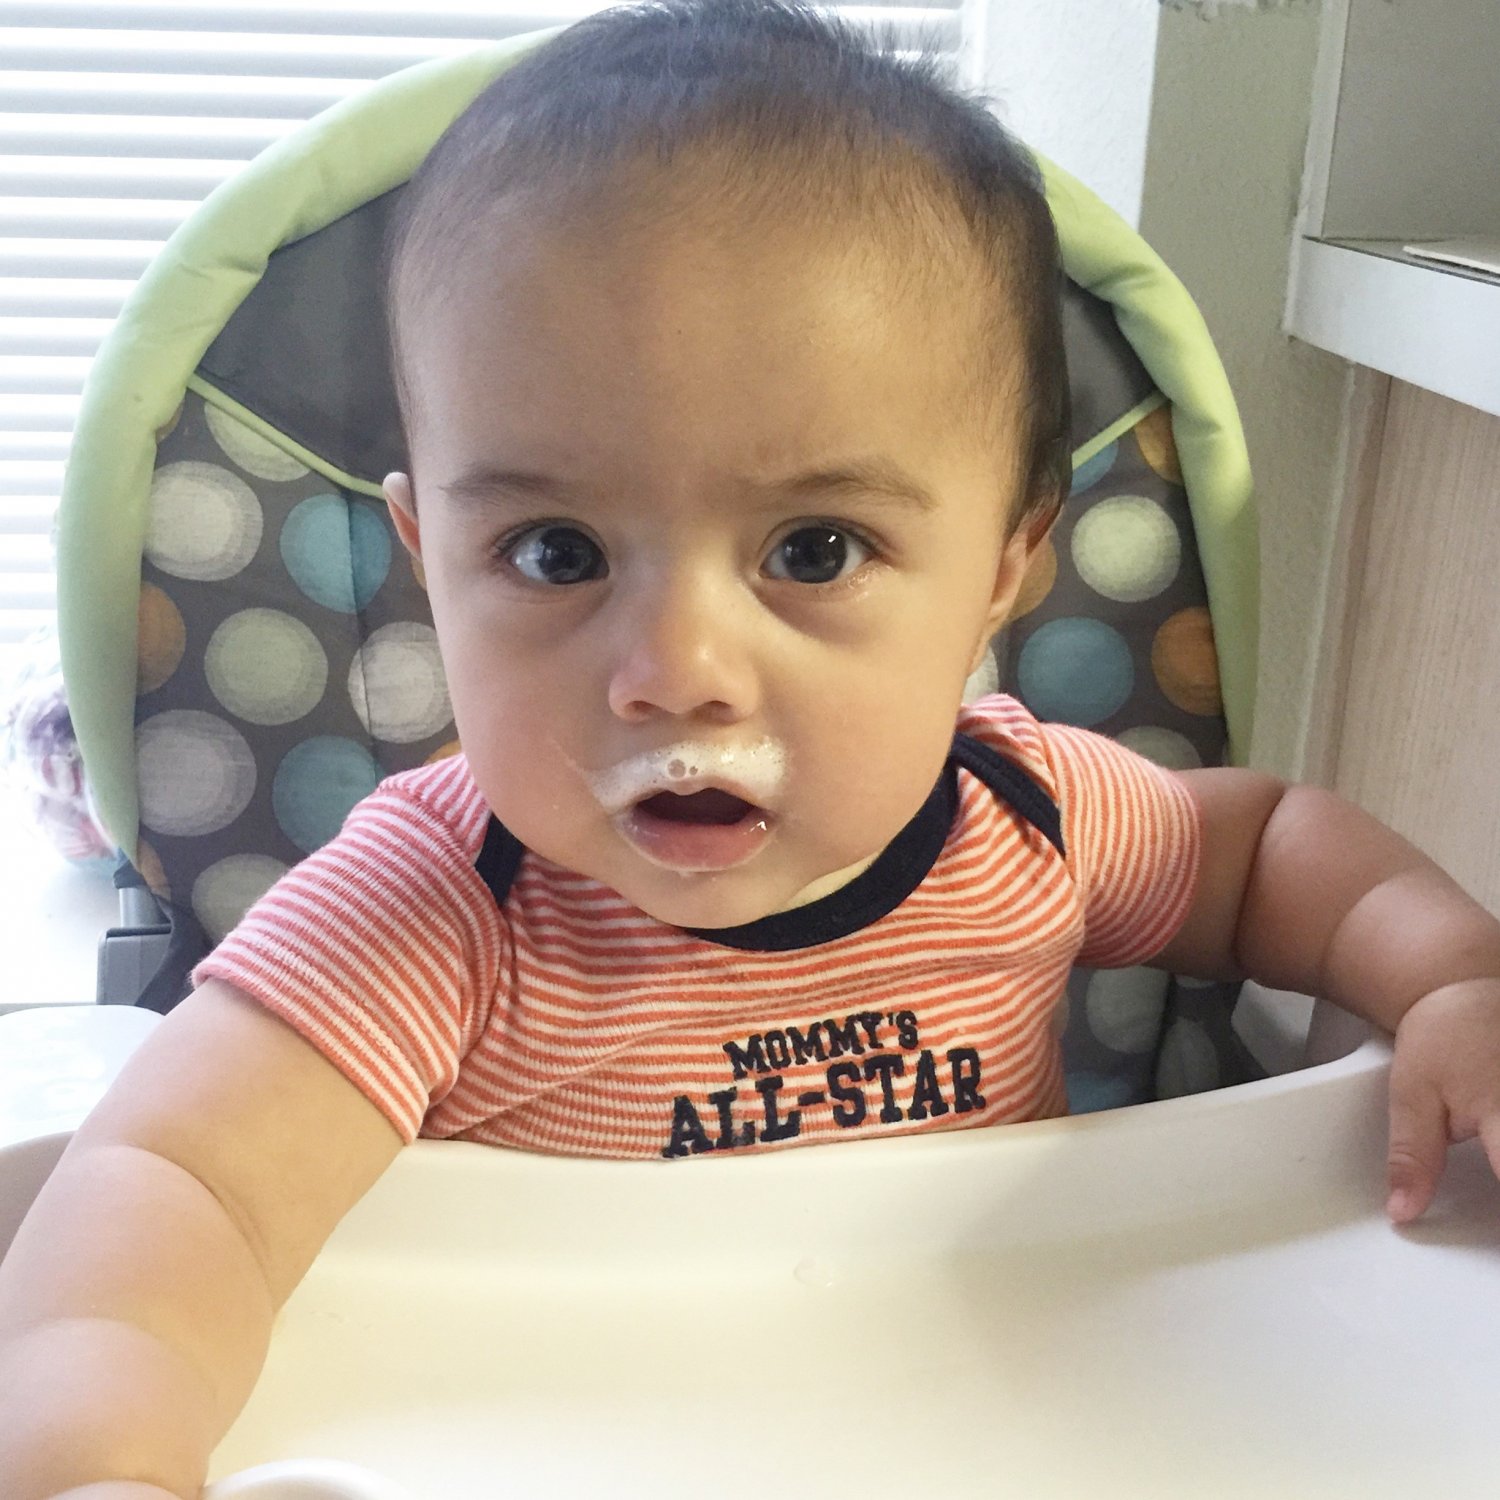 Baby in high chair with milk mustache